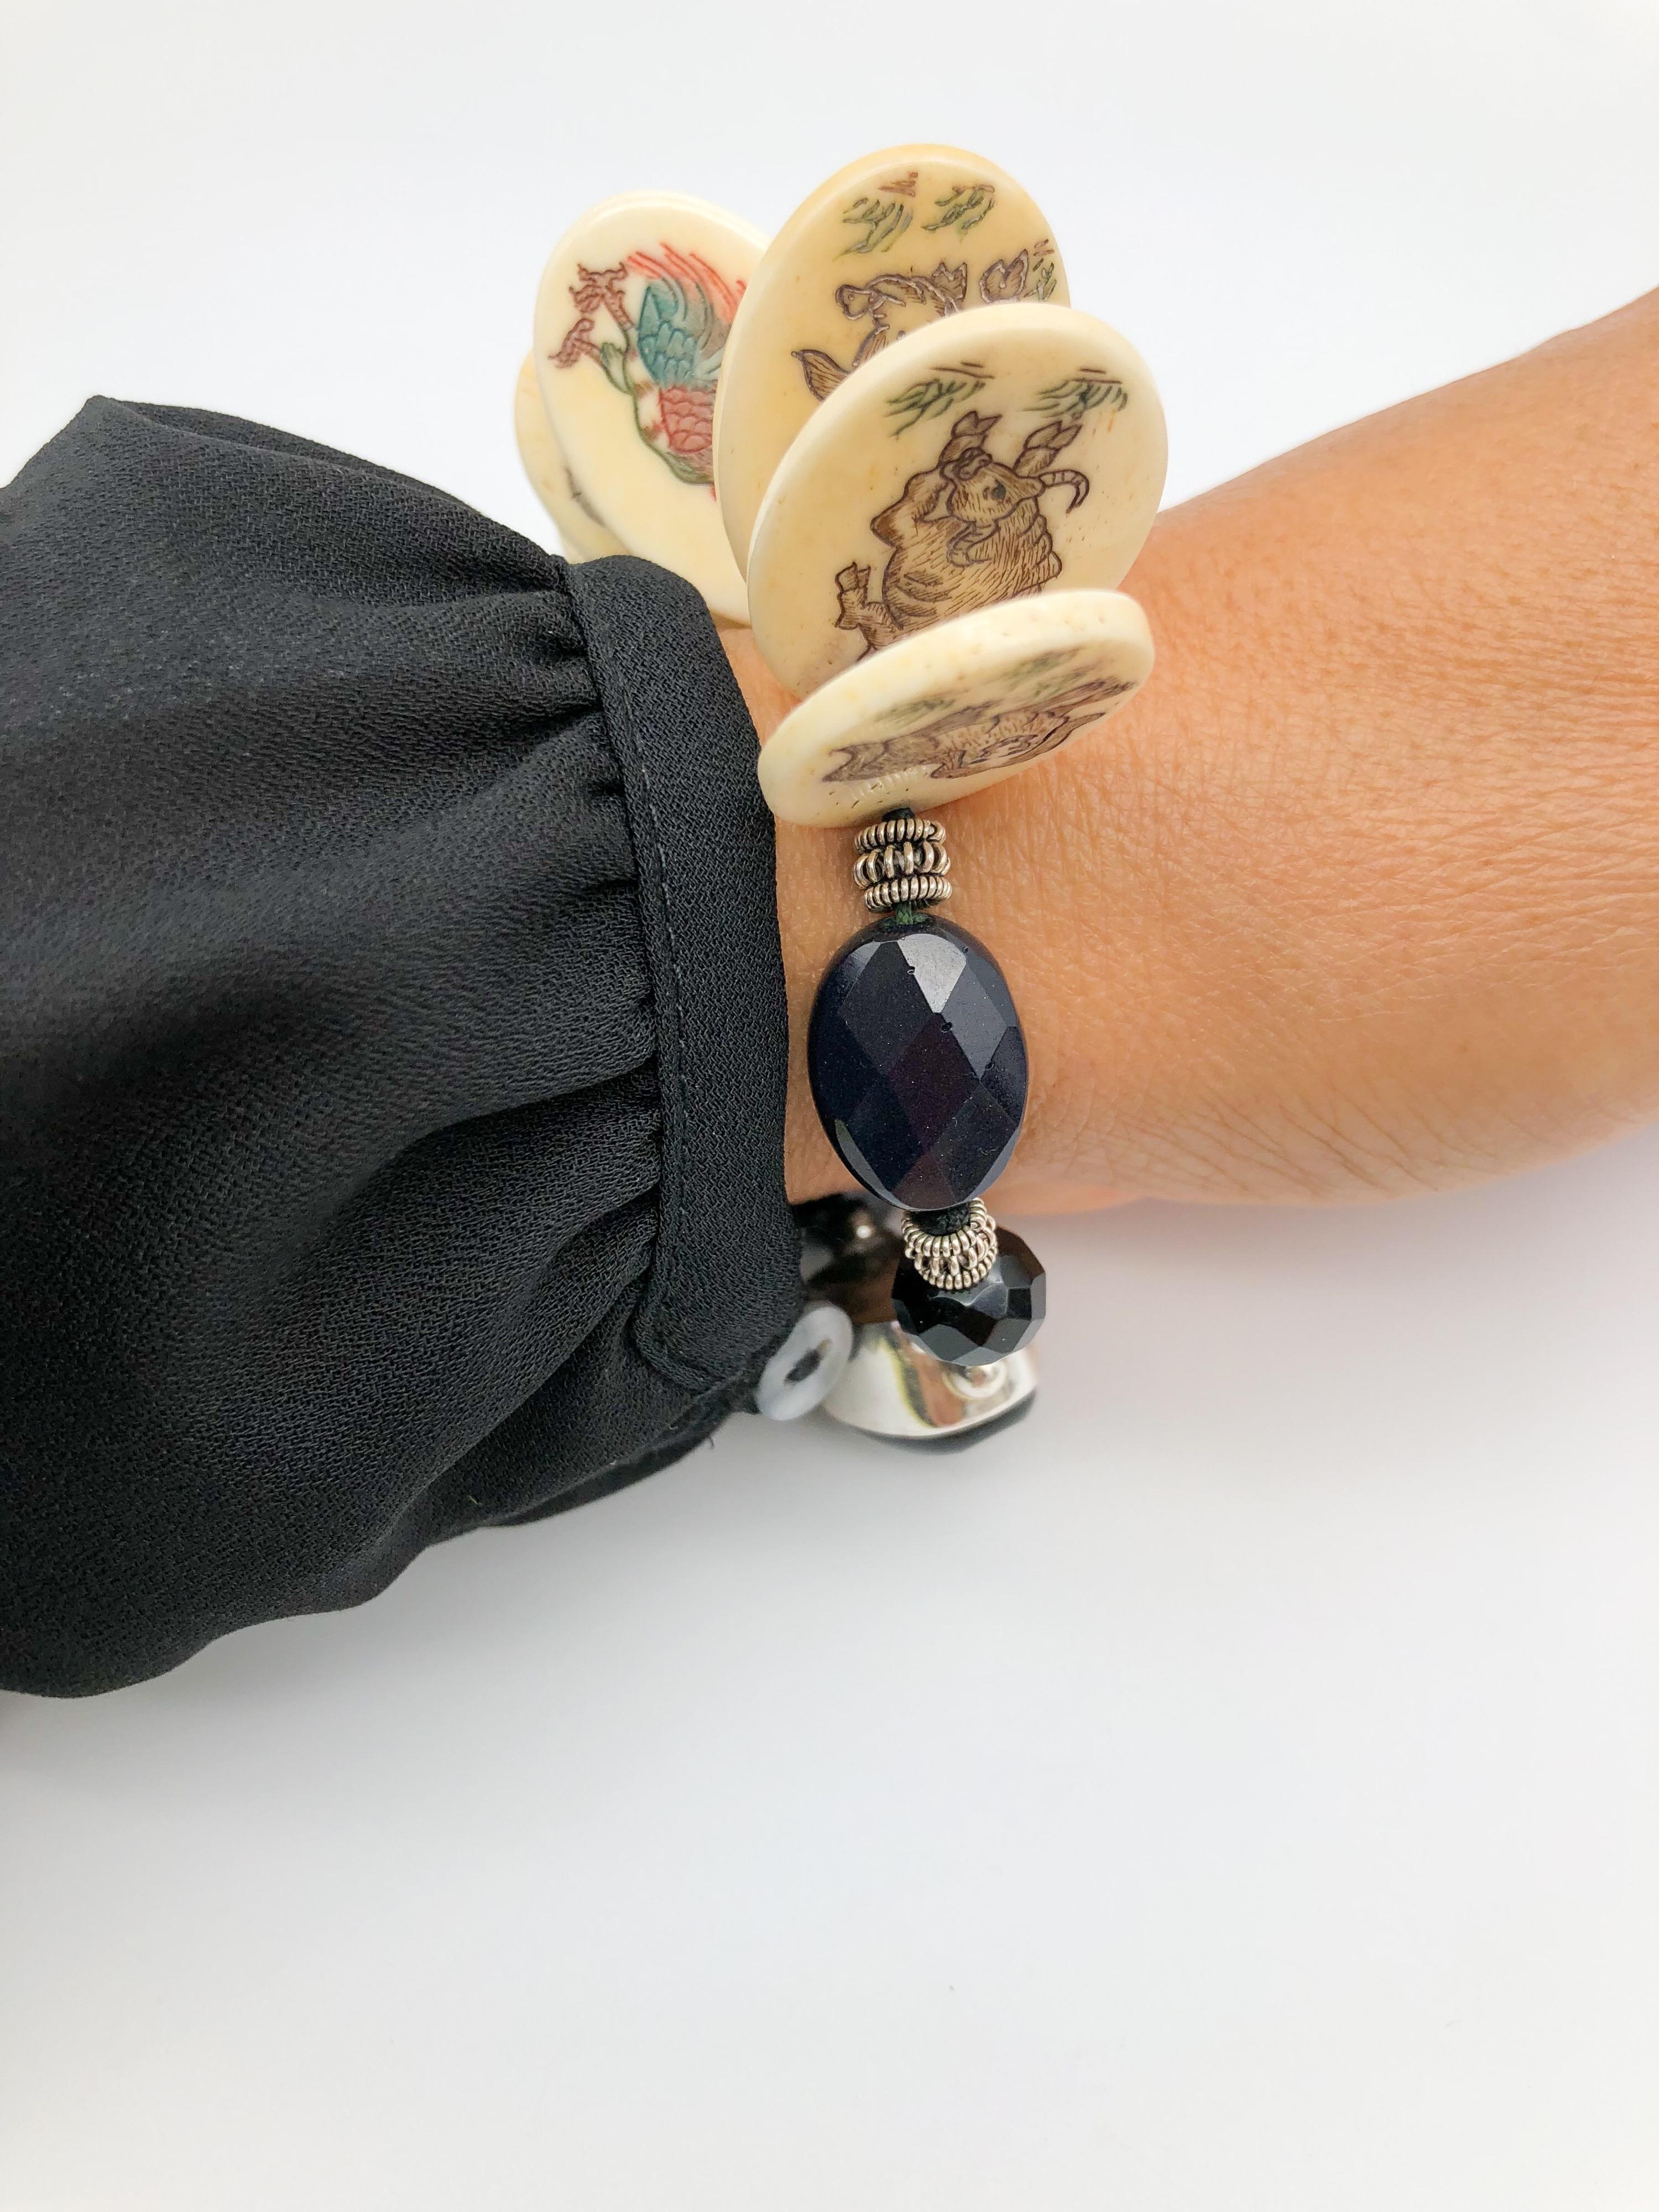 Contemporary A.Jeschel Chinese Zodiac bracelet hand painted matching with Onyx beads For Sale